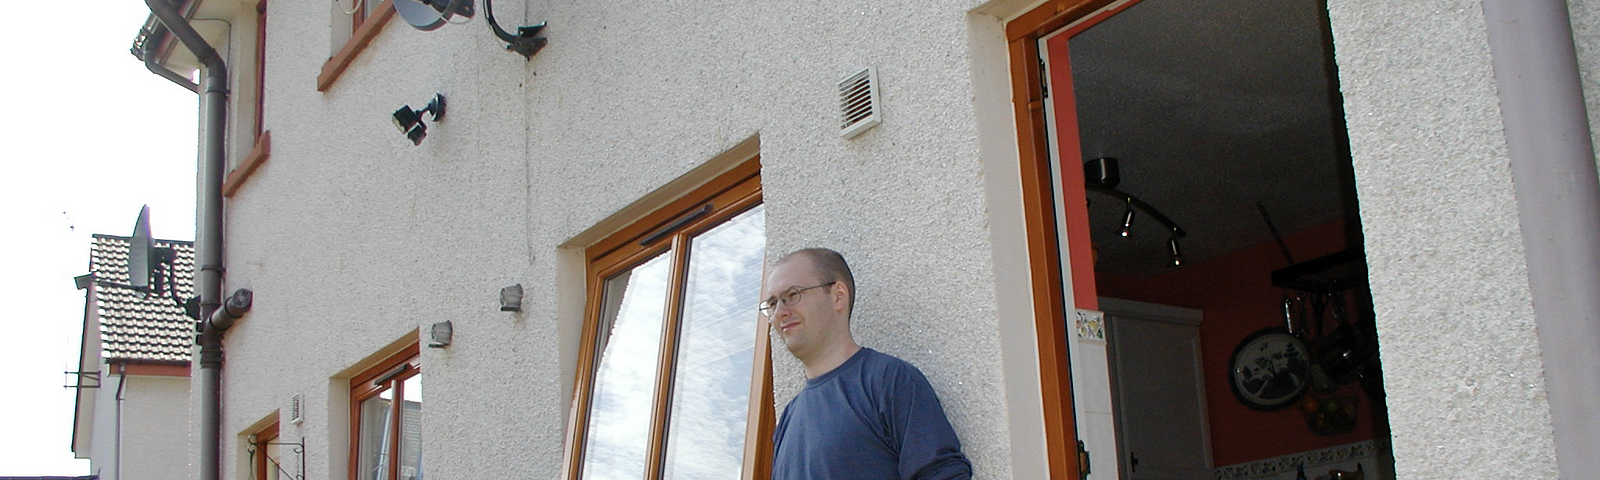 Brian Duff in summer 2003 standing outside the backdoor of a a semi-detached house in Edinburgh